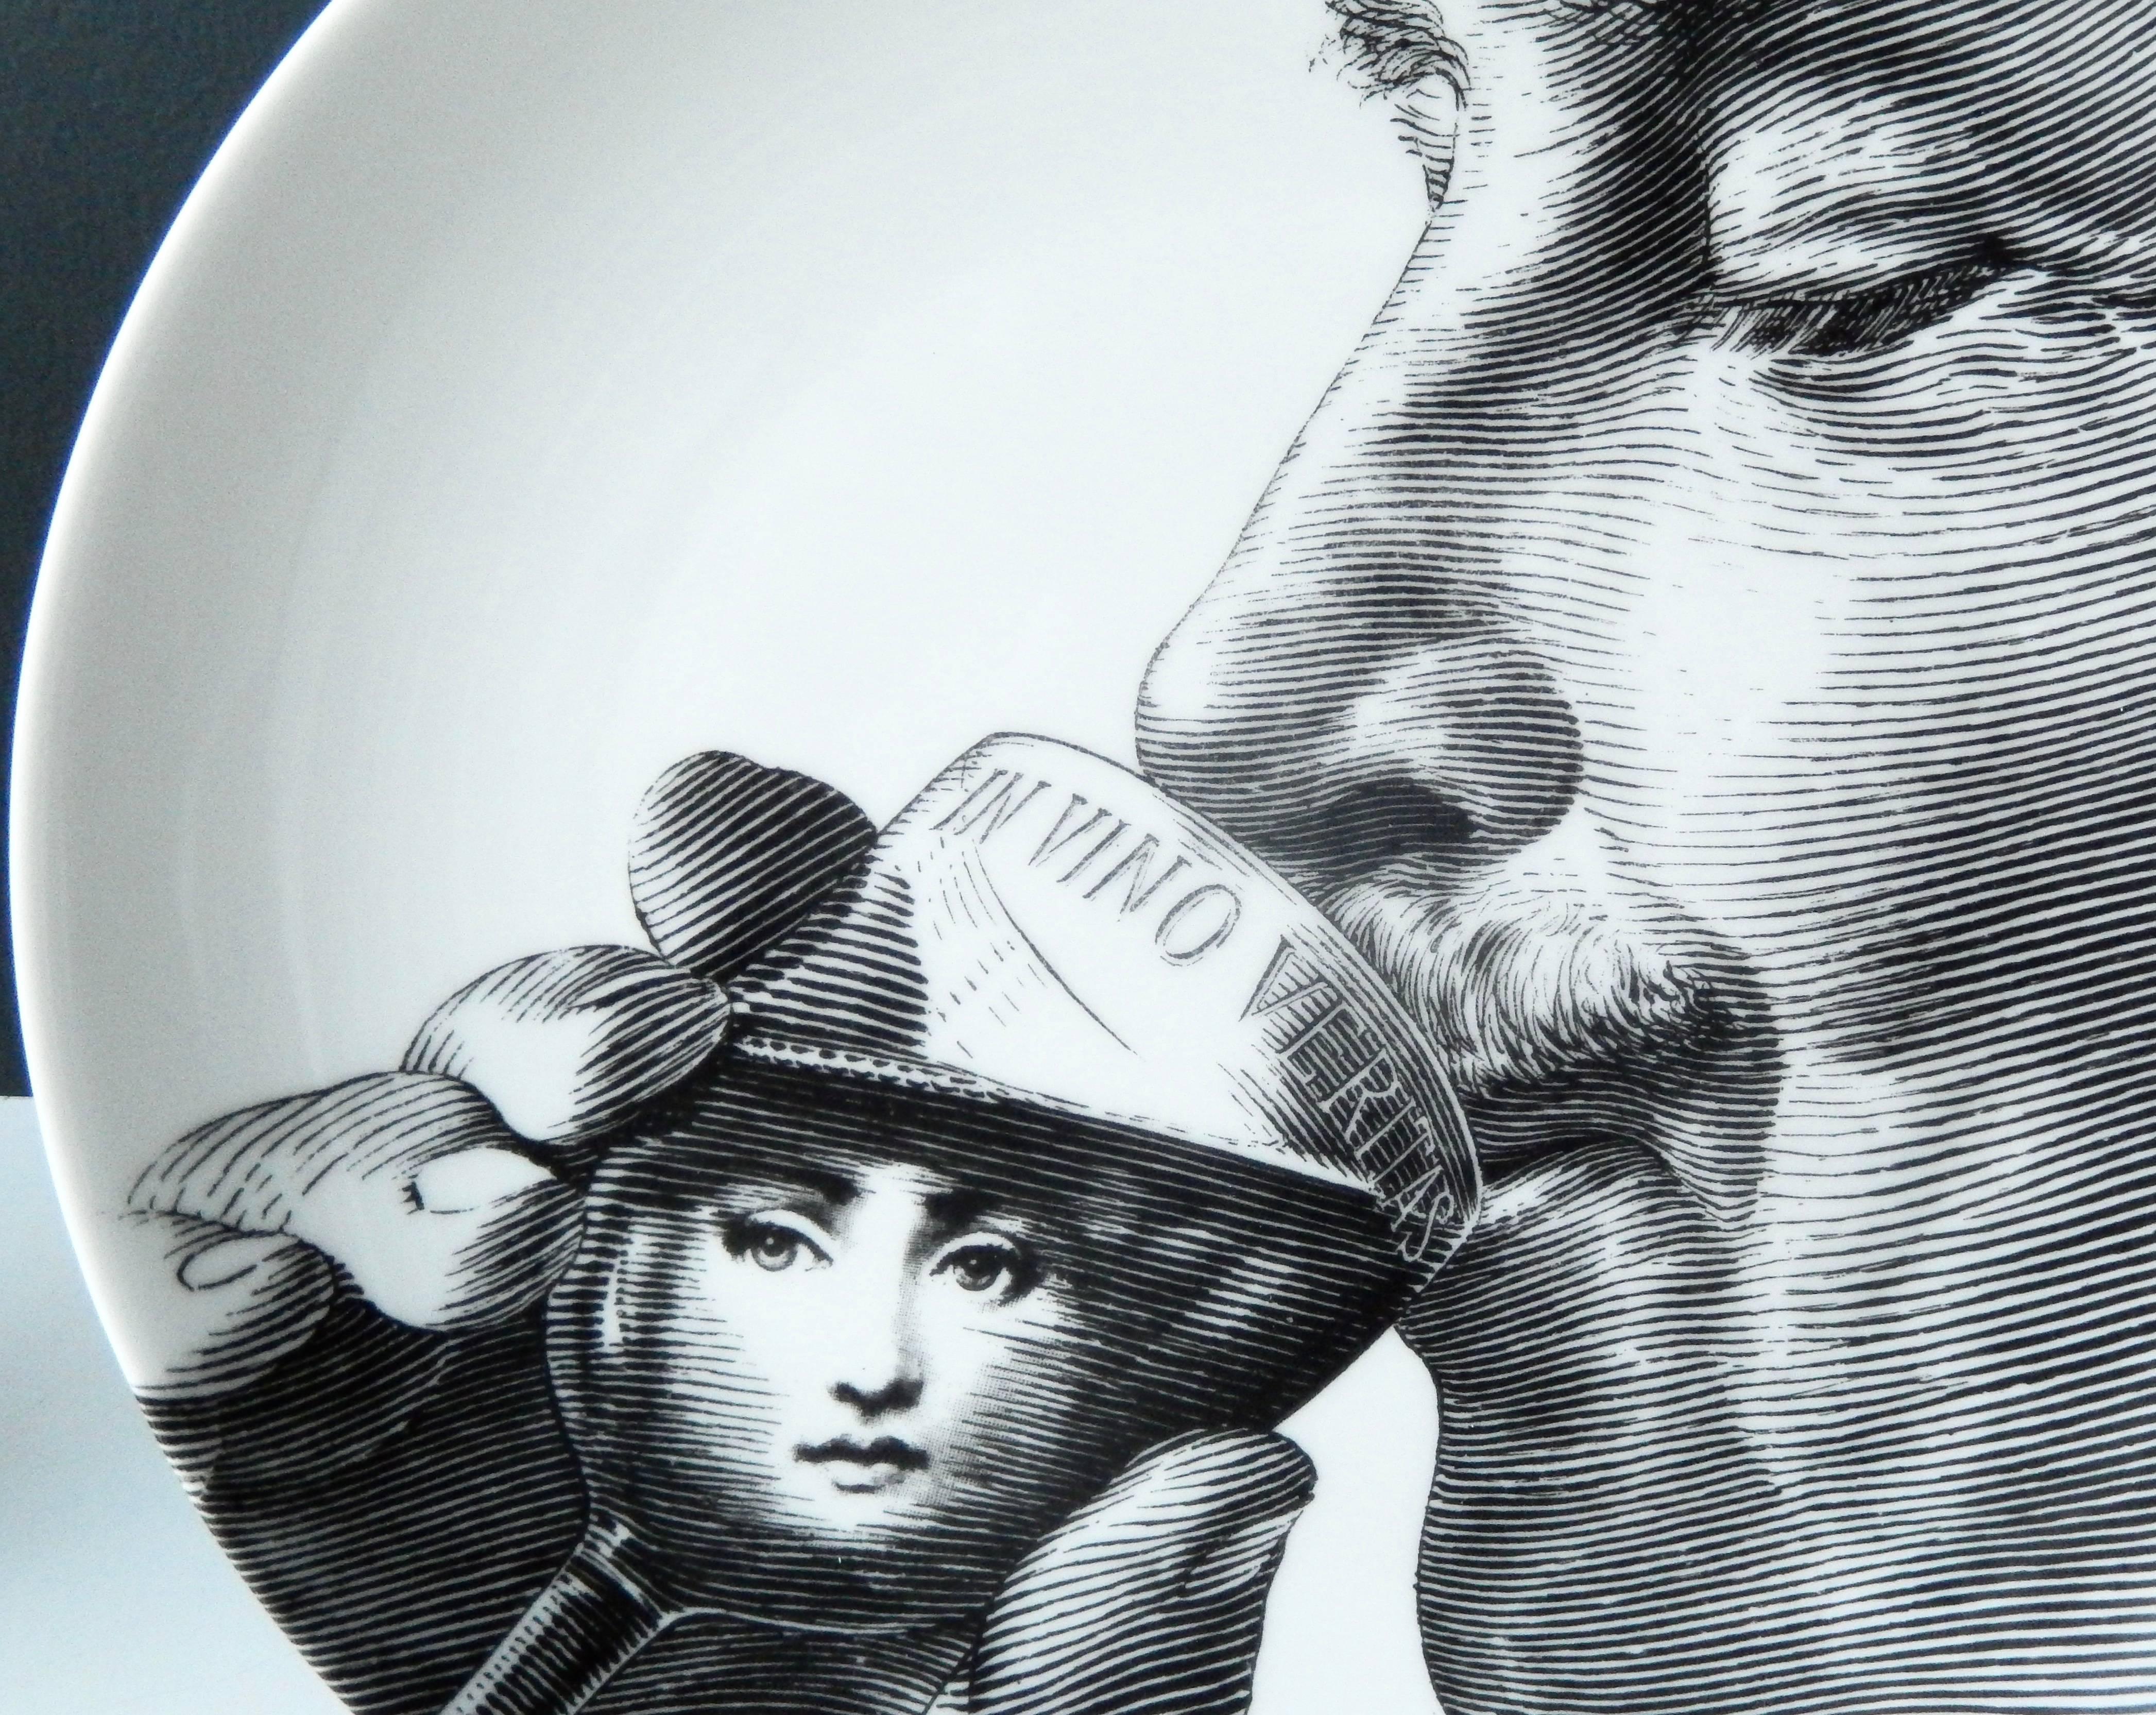 A witty, self-portrait plate of Piero Fornasetti drinking wine from a glass that reads "In Vino Veritas" (in wine there is truth). The surreal face of his muse, Lina Cavalieri, is depicted gazing at the viewer from within the glass. Among